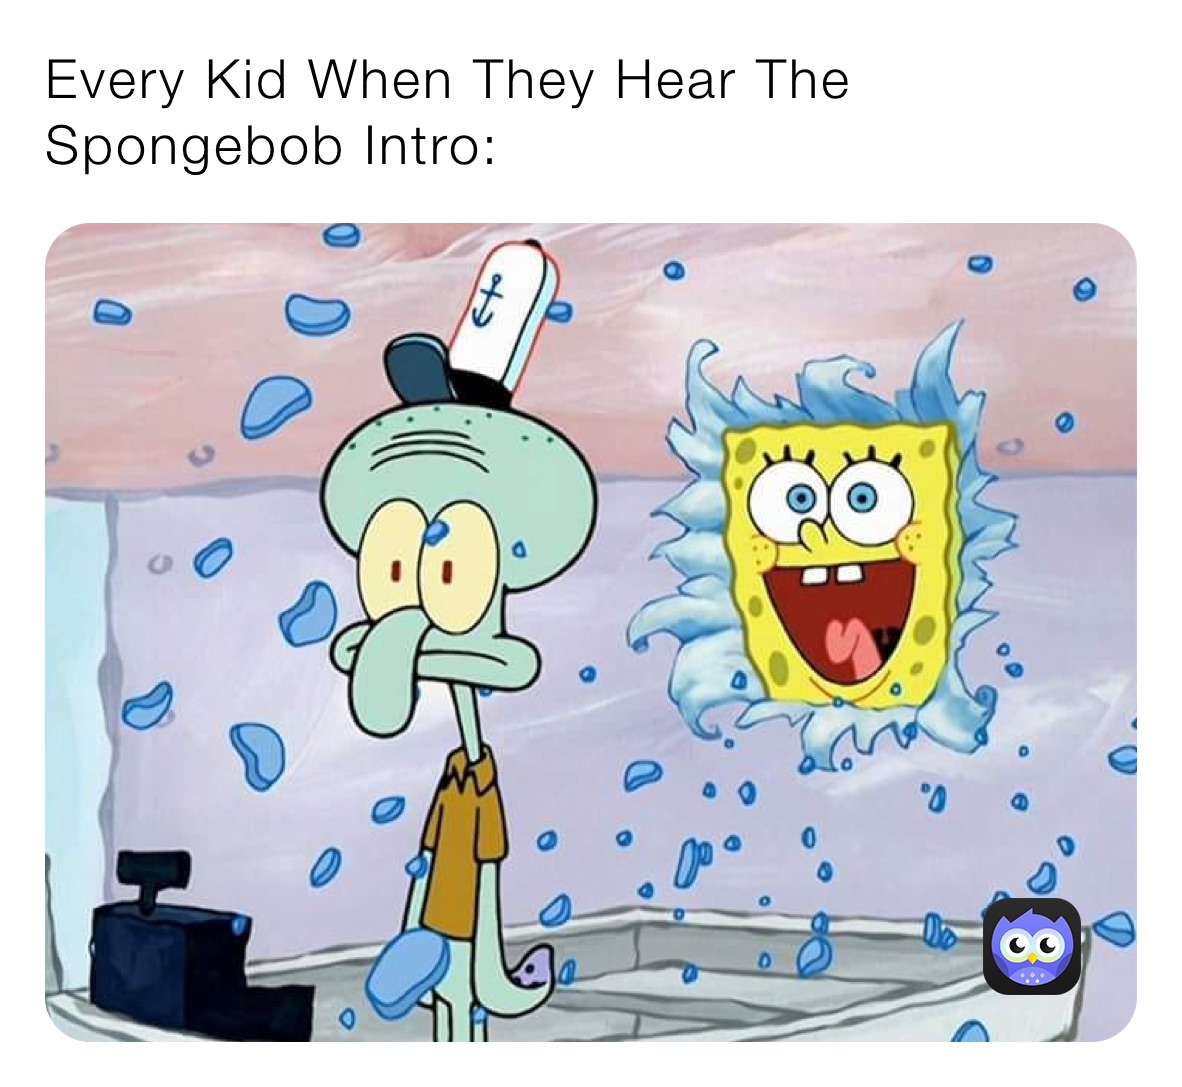 Every Kid When They Hear The Spongebob Intro: